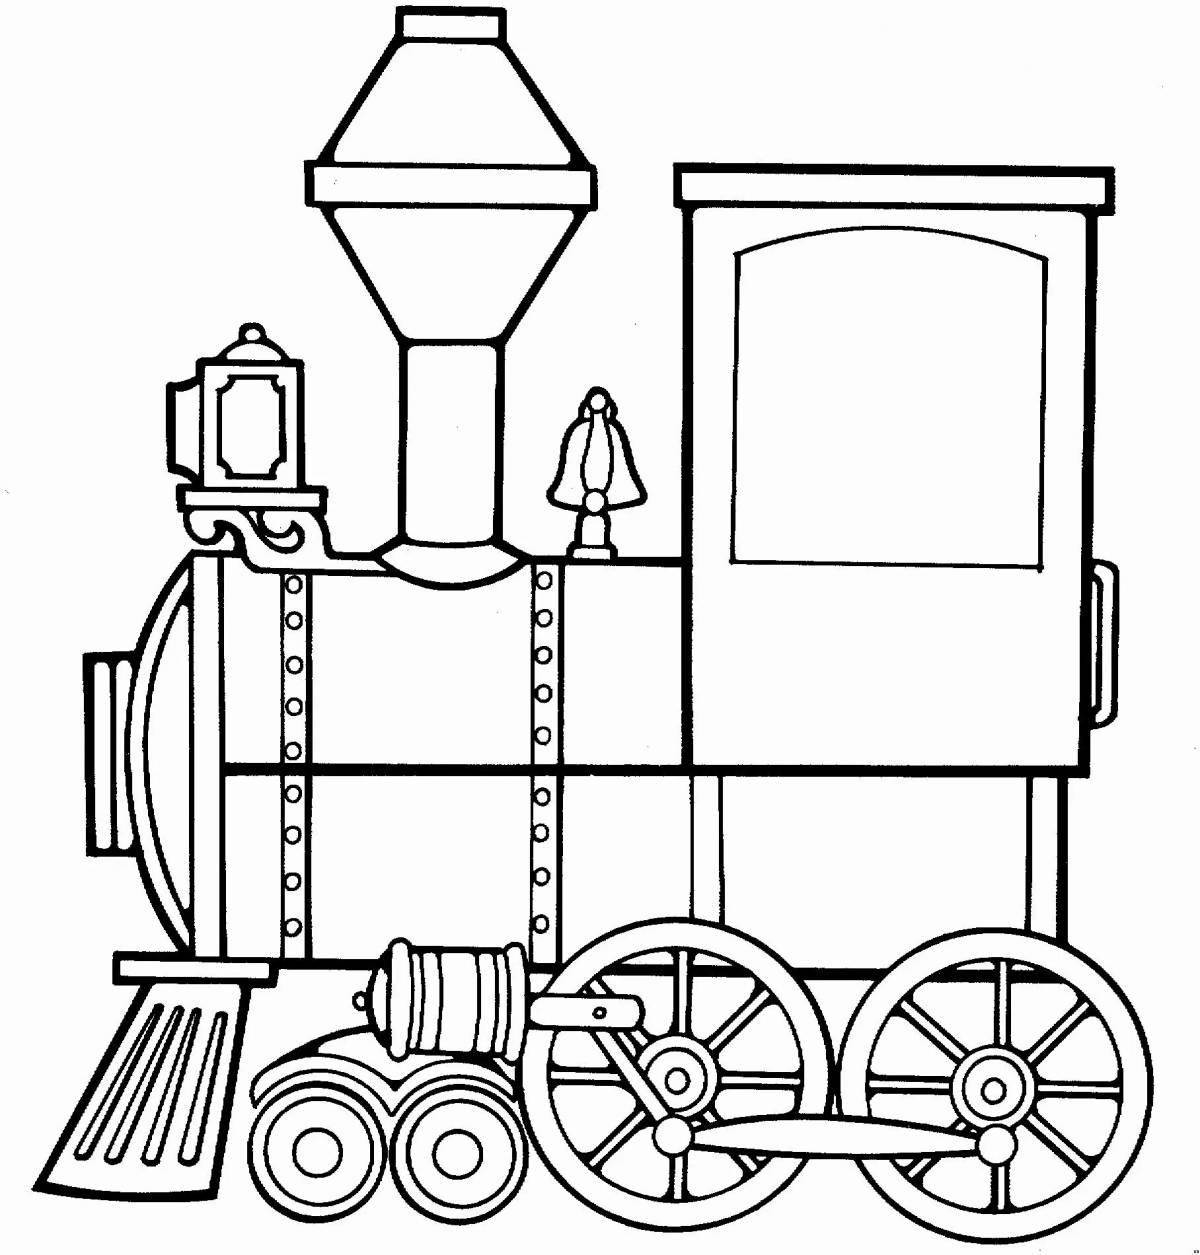 Colorful locomotive coloring pages for kids